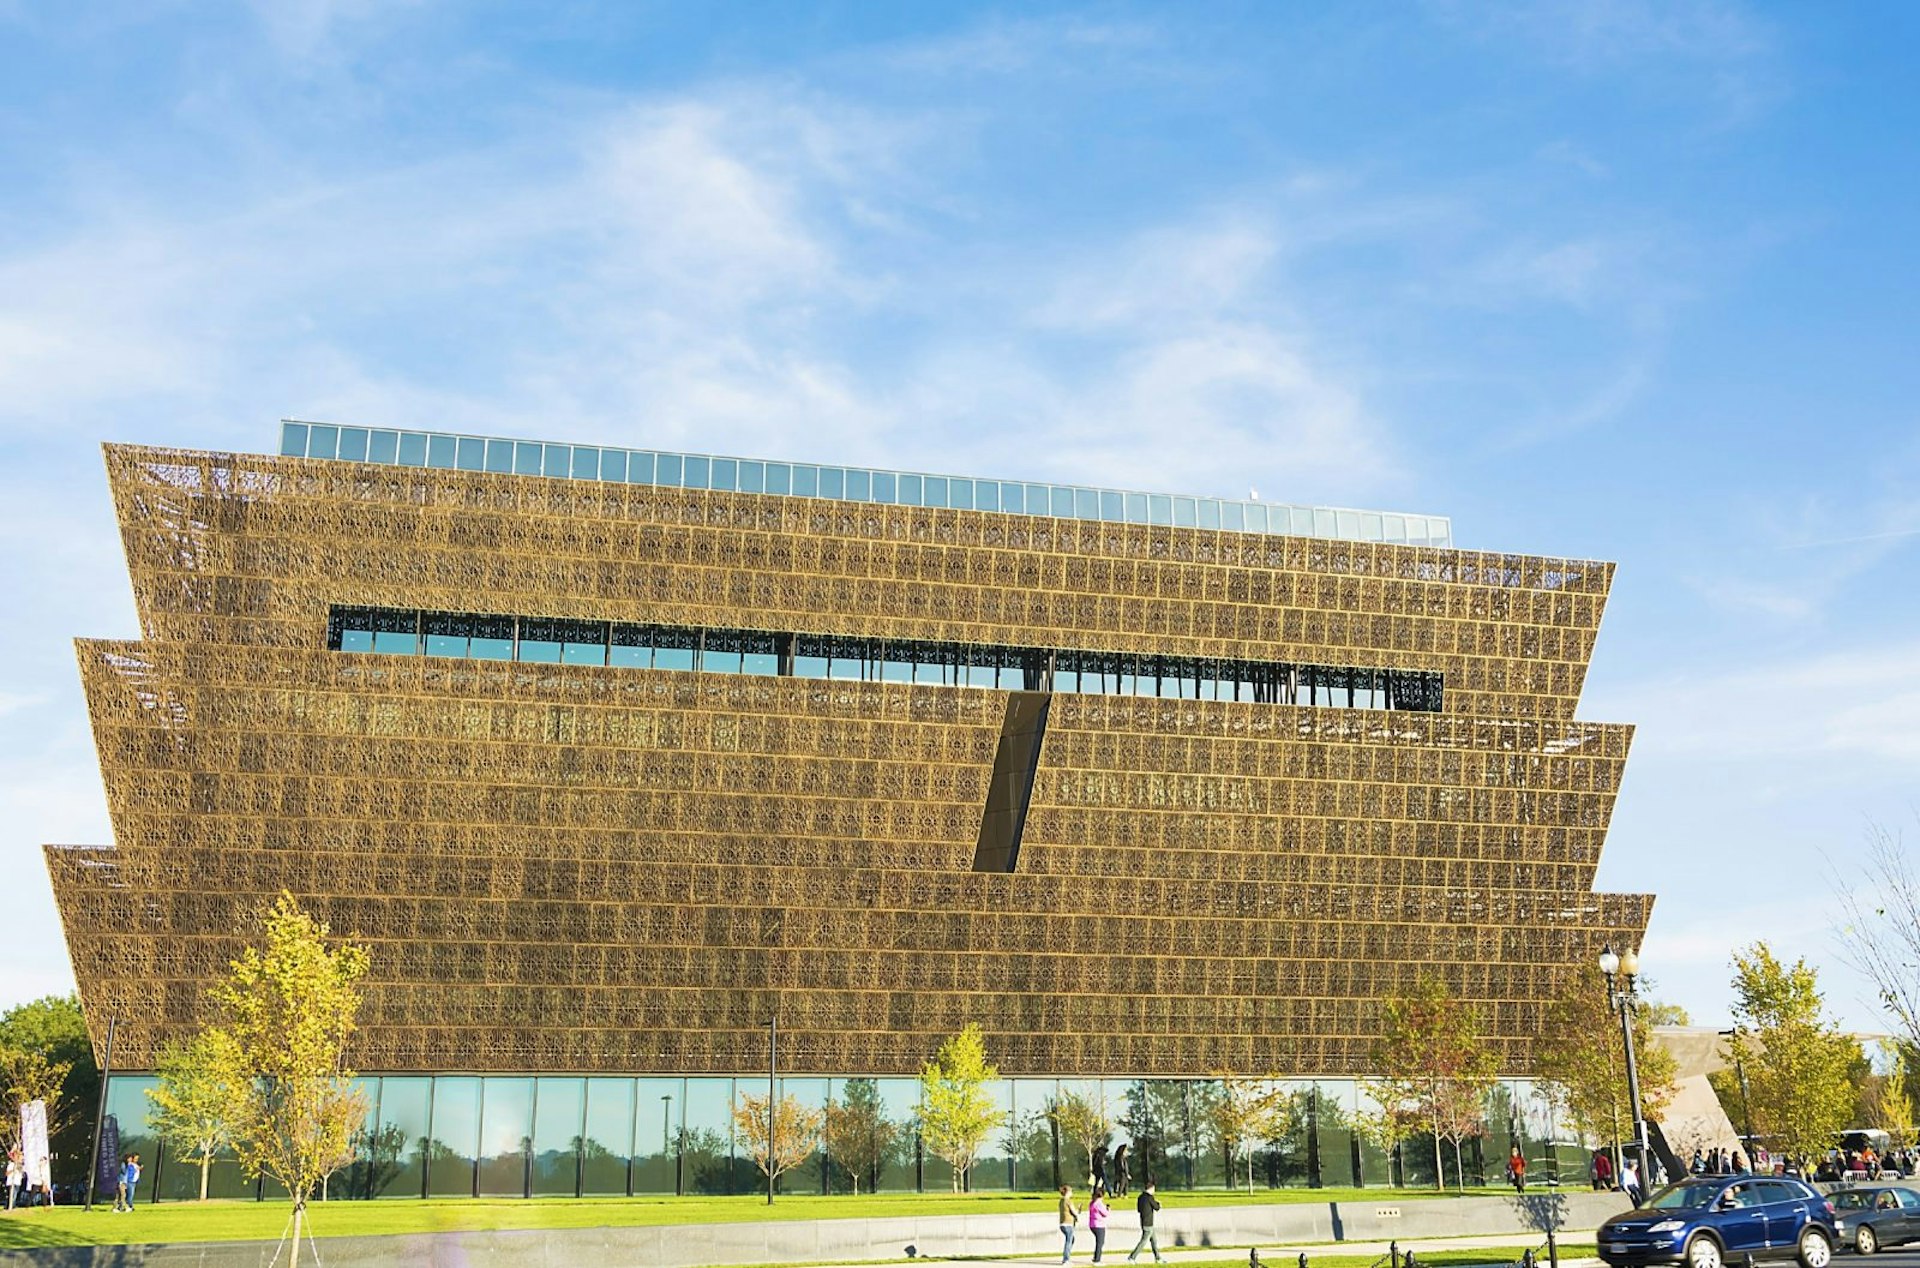 the modern gold facade of the Smithsonian National Museum of African American History and Culture in Washington, DC